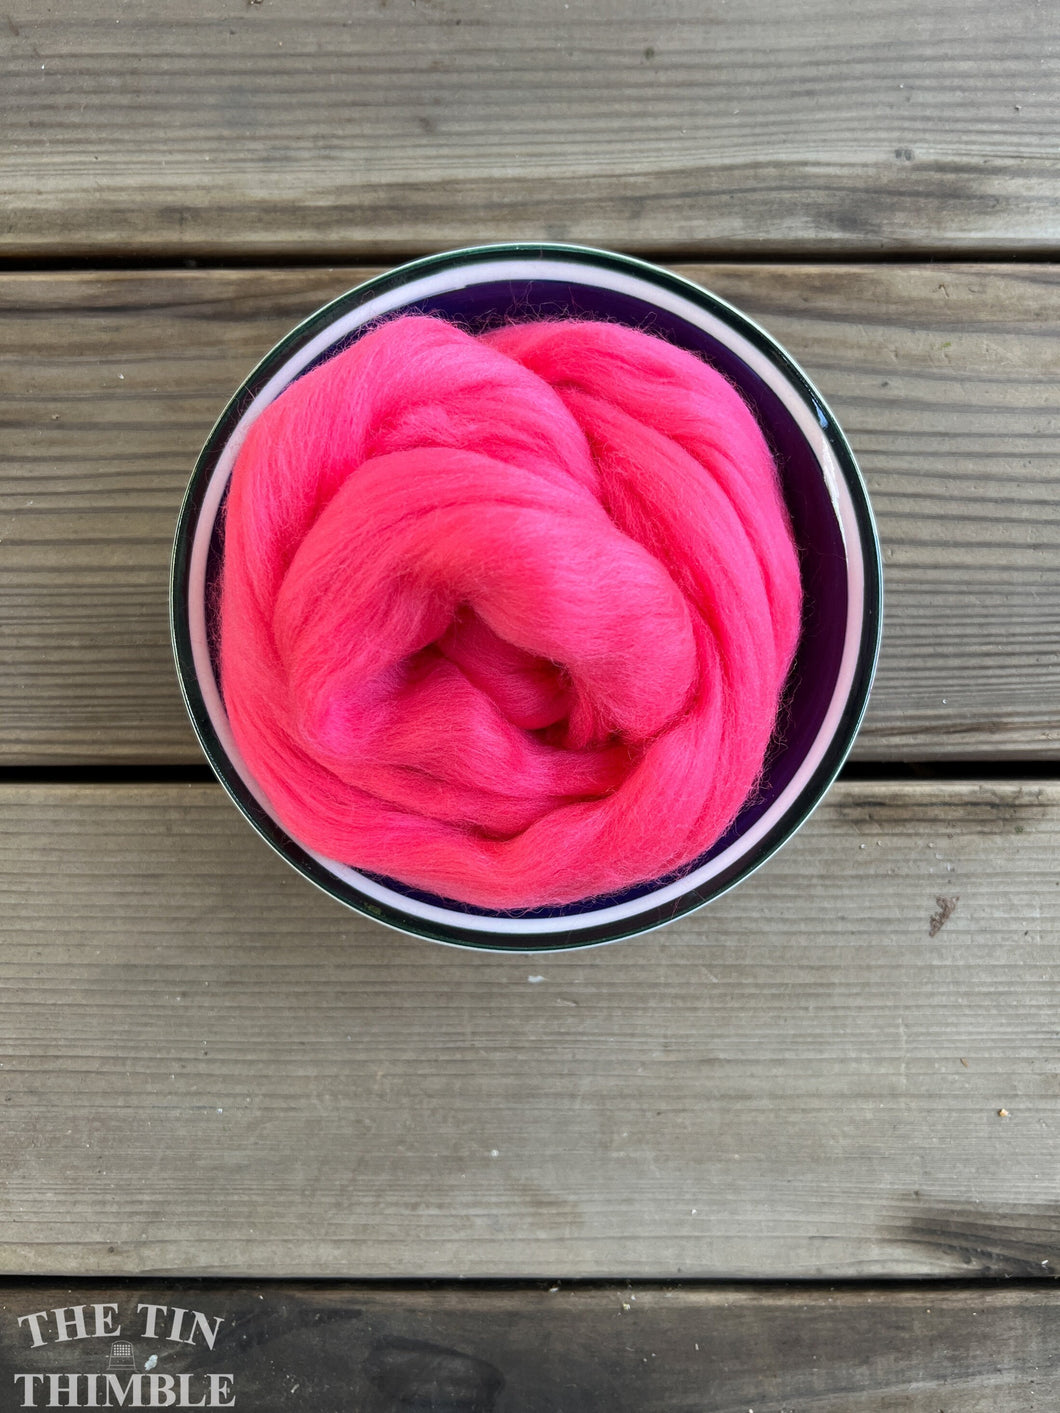 Watermelon Pink Merino Wool Roving - 21.5 micron -1 oz - For Nuno Felting, Wet Felting, Weaving, Spinning and More